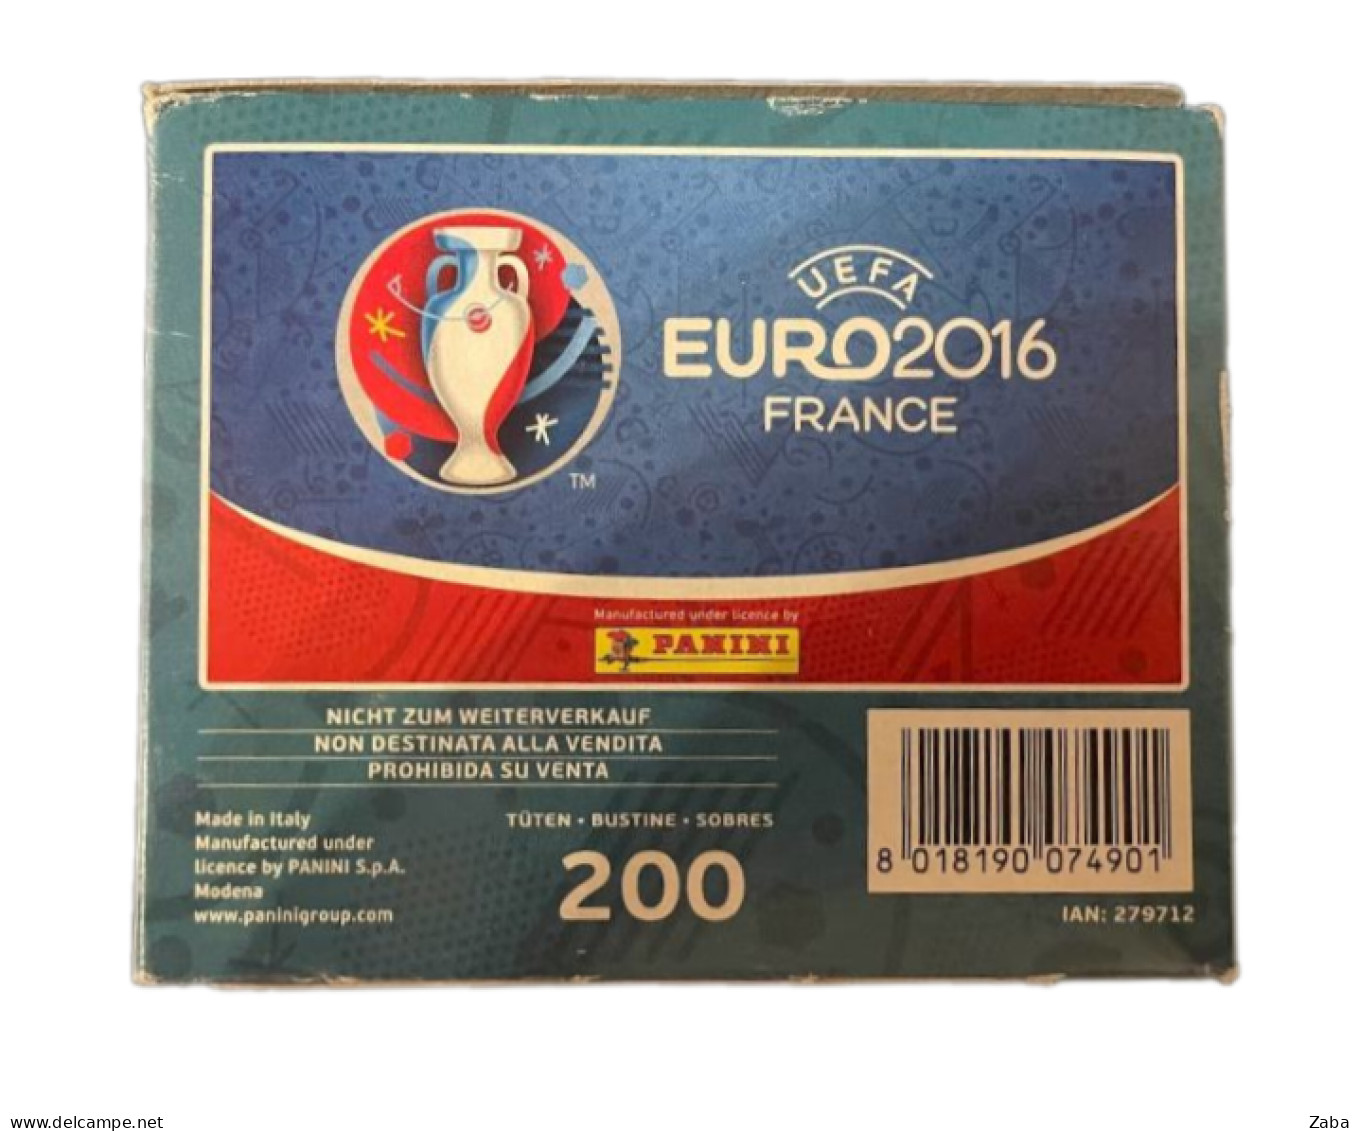 Panini EURO 2016 Lidl Box, 200 Packets, Not Opened! - Edition Italienne